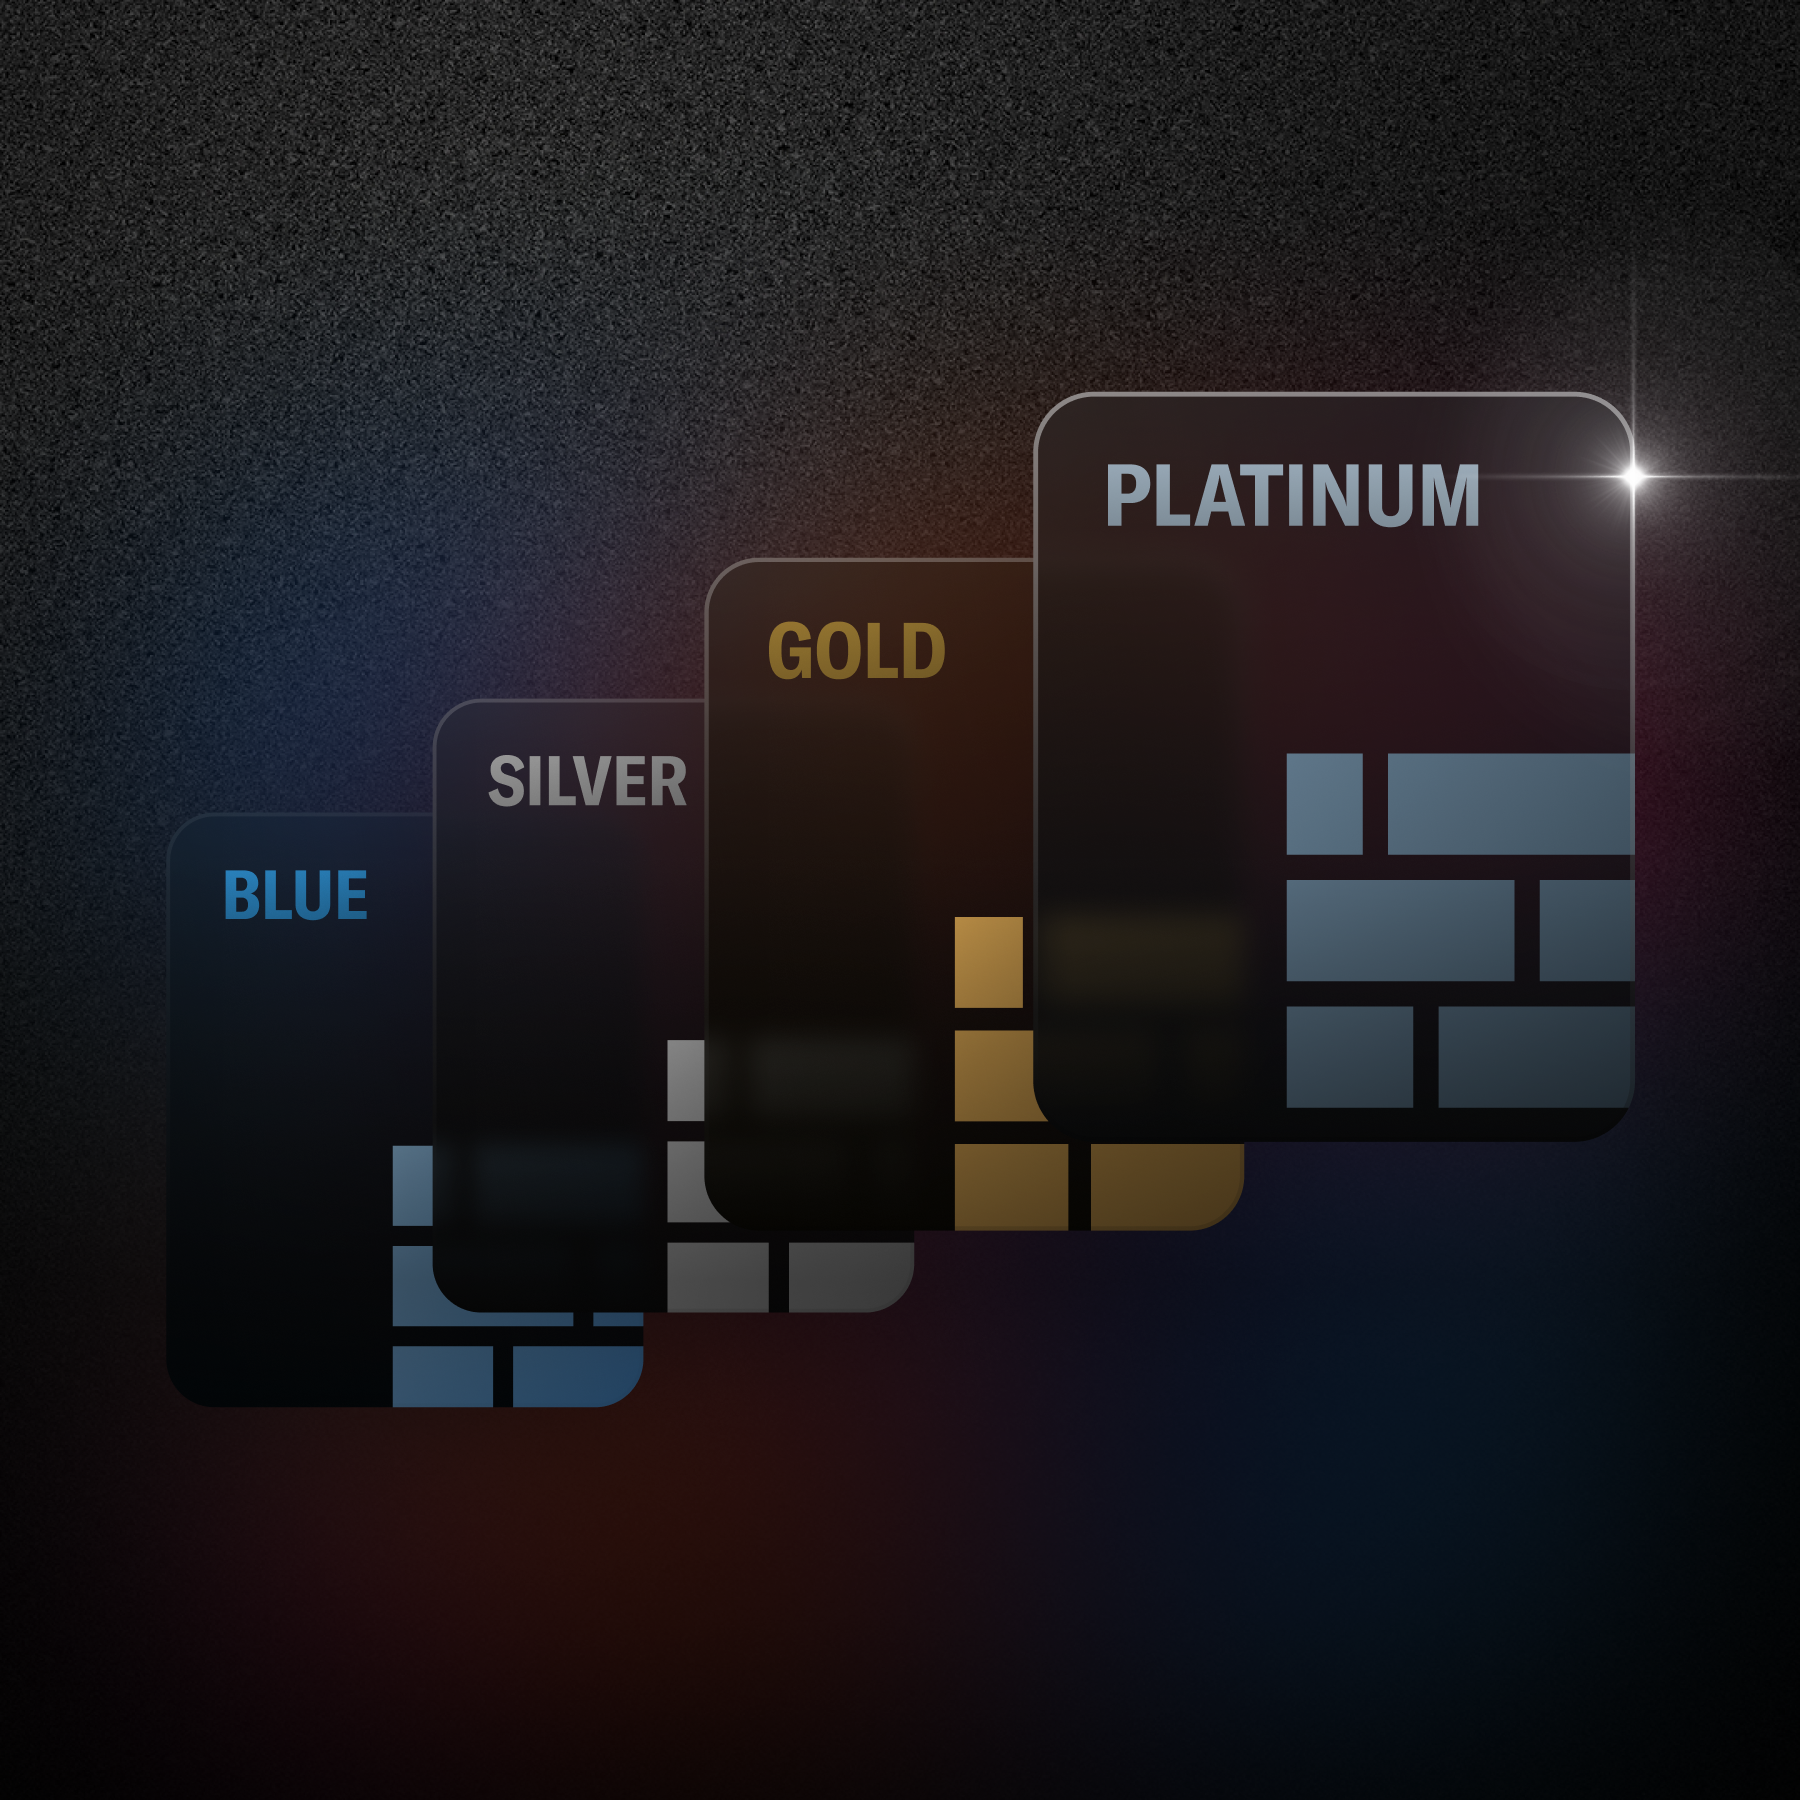 Four floating "cards" with Bilt logos and status tiers: blue, silver, gold, platinum